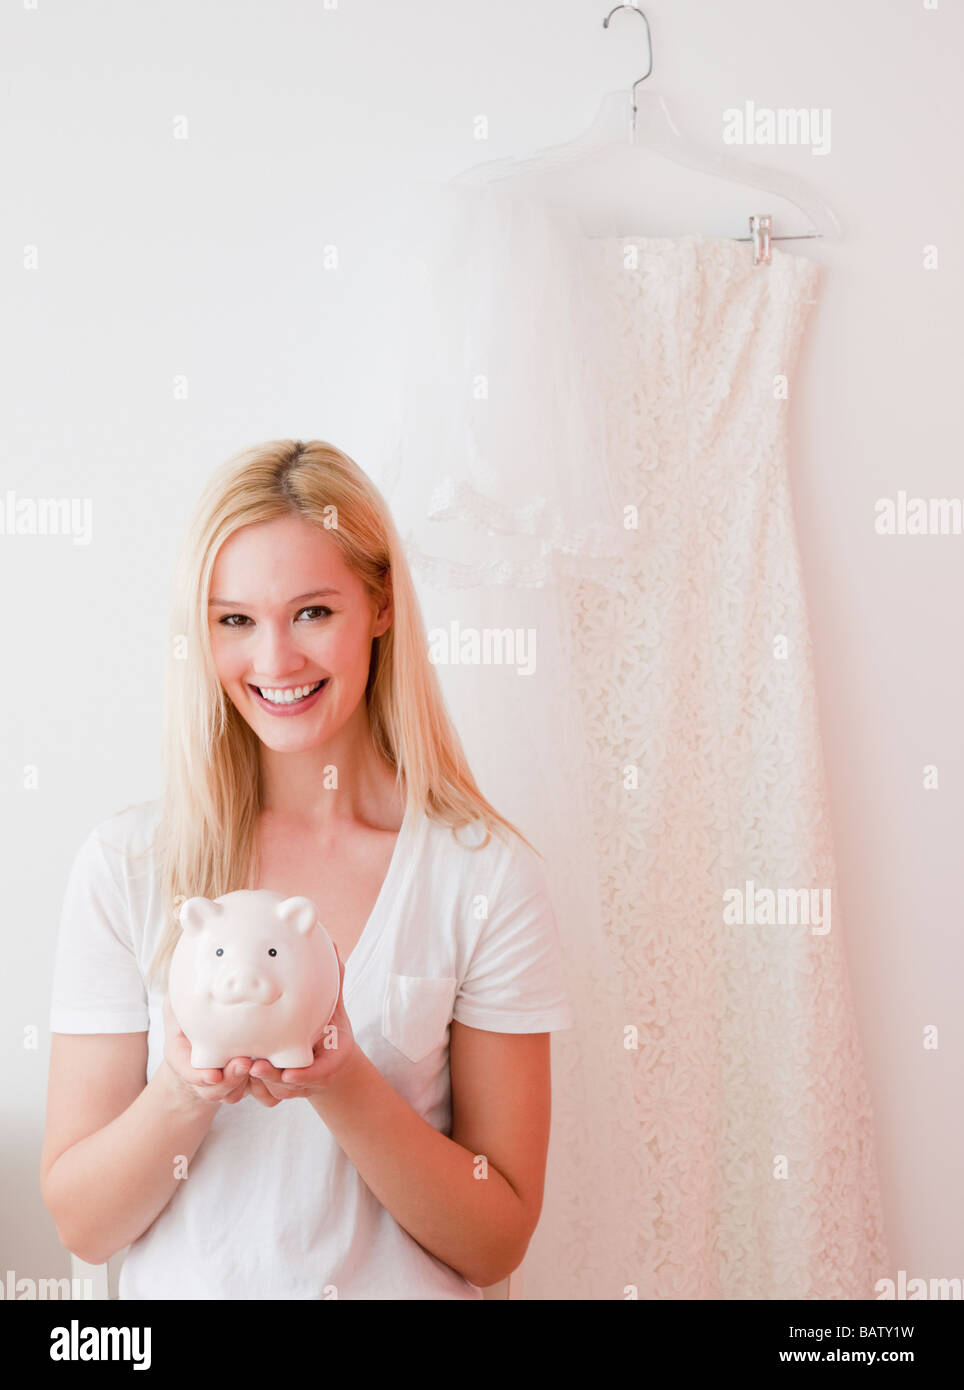 Portrait of young woman holding piggy bank with savings for wedding Stock Photo